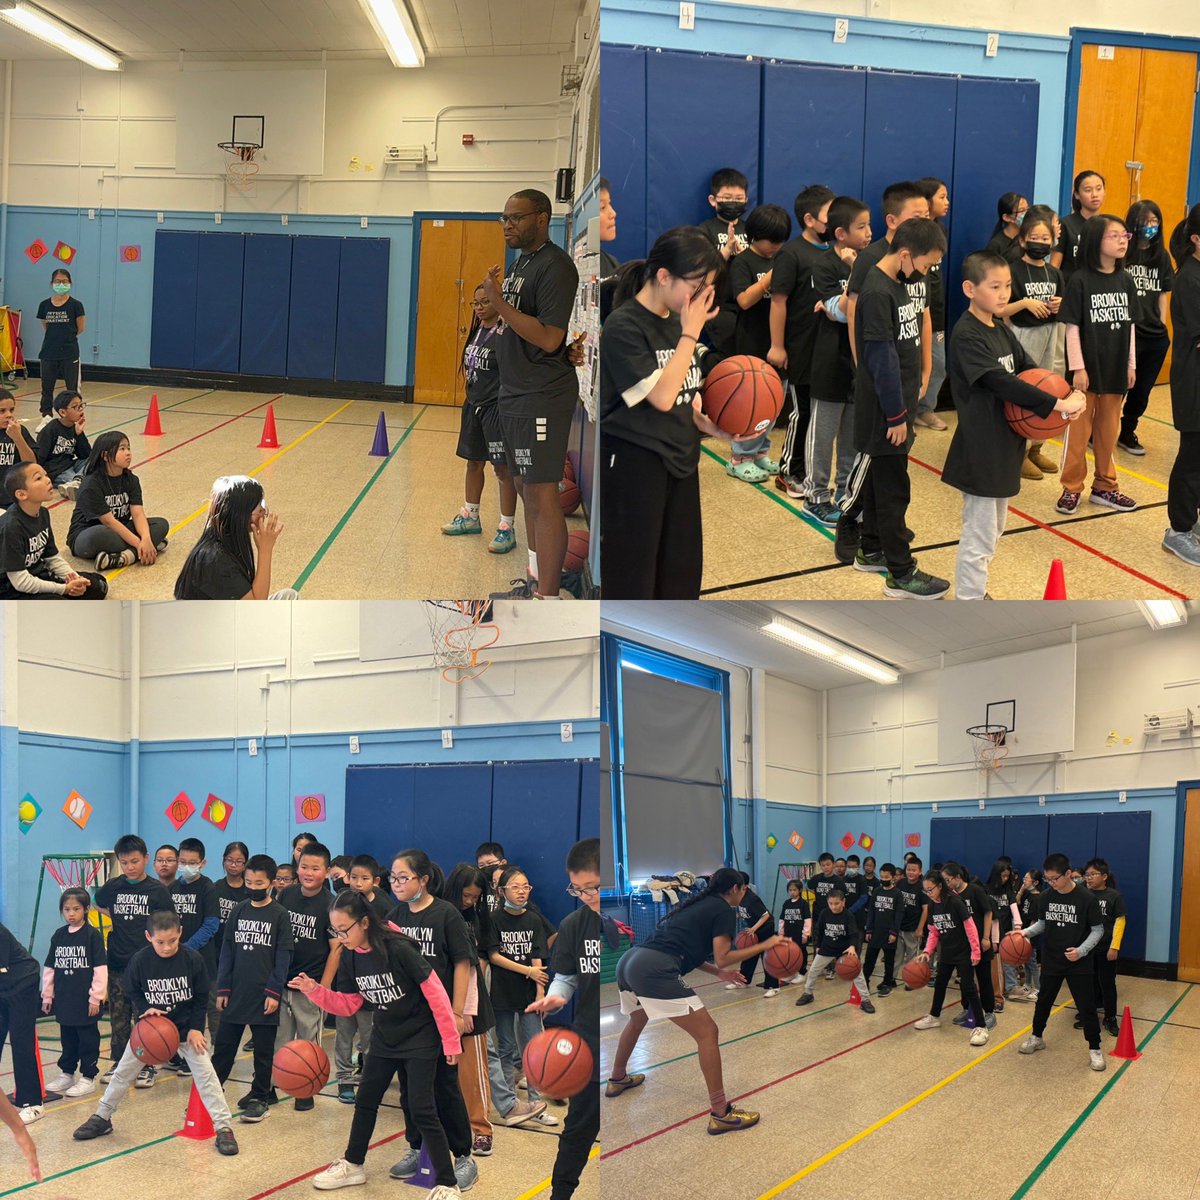 Our 5th grade students are having a great time at the basketball clinic . Thank you Superintendent Alvarez and @BrooklynNets for providing this wonderful experience @NYCDOED15 @NicLanzillotto @CristinaAGonza5 @NYCSchools